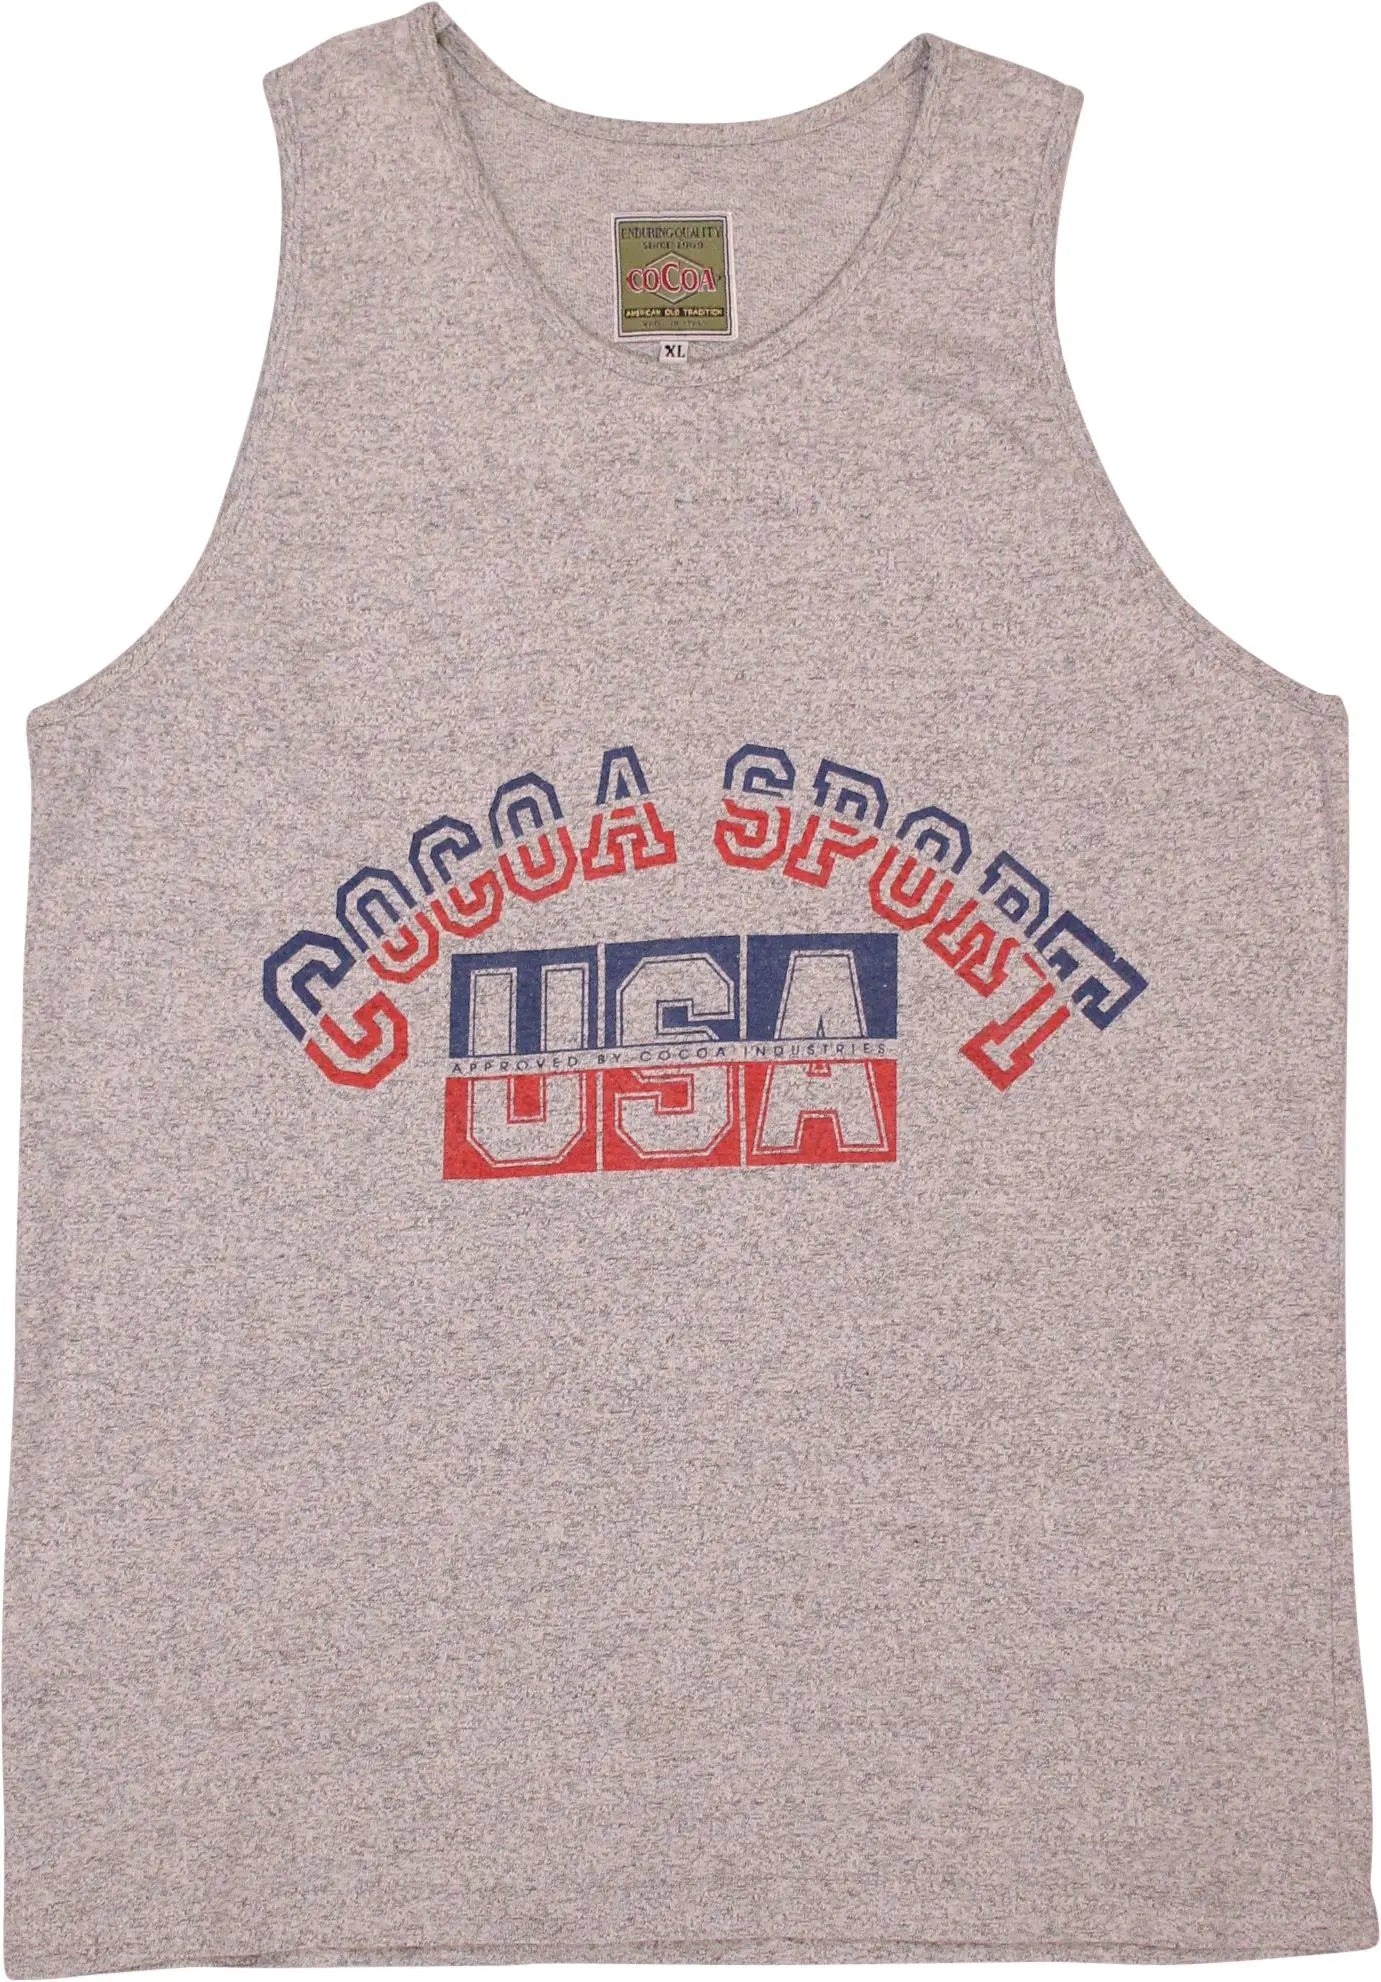 Cocoa - 80s Sports Tanktop- ThriftTale.com - Vintage and second handclothing